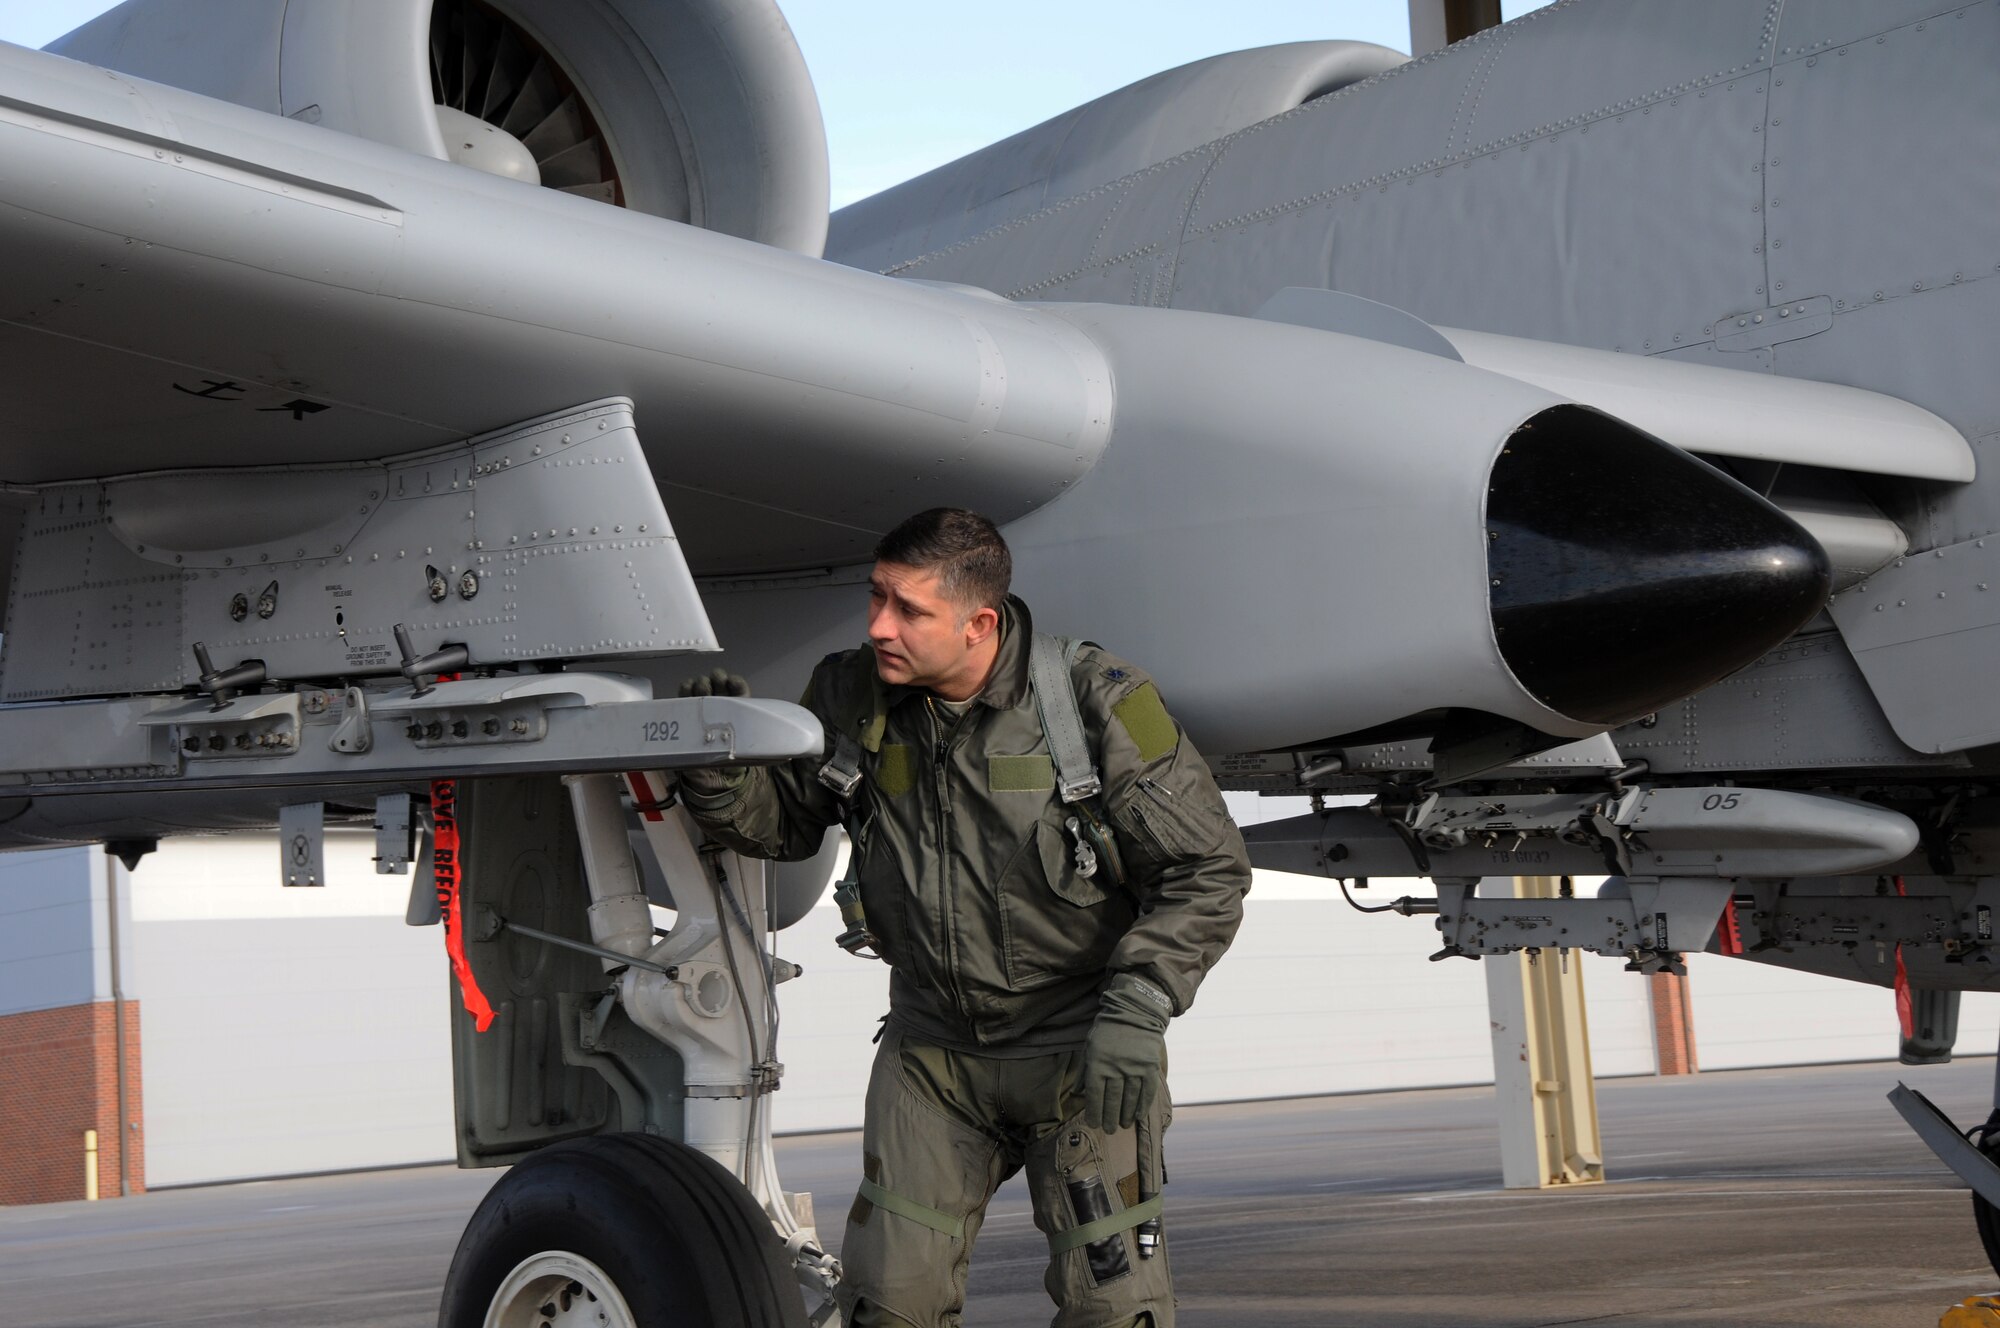 Lt. Col. John Gonzales, 23rd Operations Support Squadron commander, performs preflight inspections on Tail No. 649, a 188th Fighter Wing A-10C Thunderbolt II “Warthog,” before delivering the aircraft to Moody Air Force Base, Ga., Feb. 11, 2014. The 188th is undergoing a mission conversion from A-10s to remotely piloted aircraft with an intelligence and targeting mission. The 188th now has seven A-10s remaining on station. The last two Warthogs are slated to depart in June 2014. (U.S. Air National Guard photo by Senior Airman John Hillier/released)